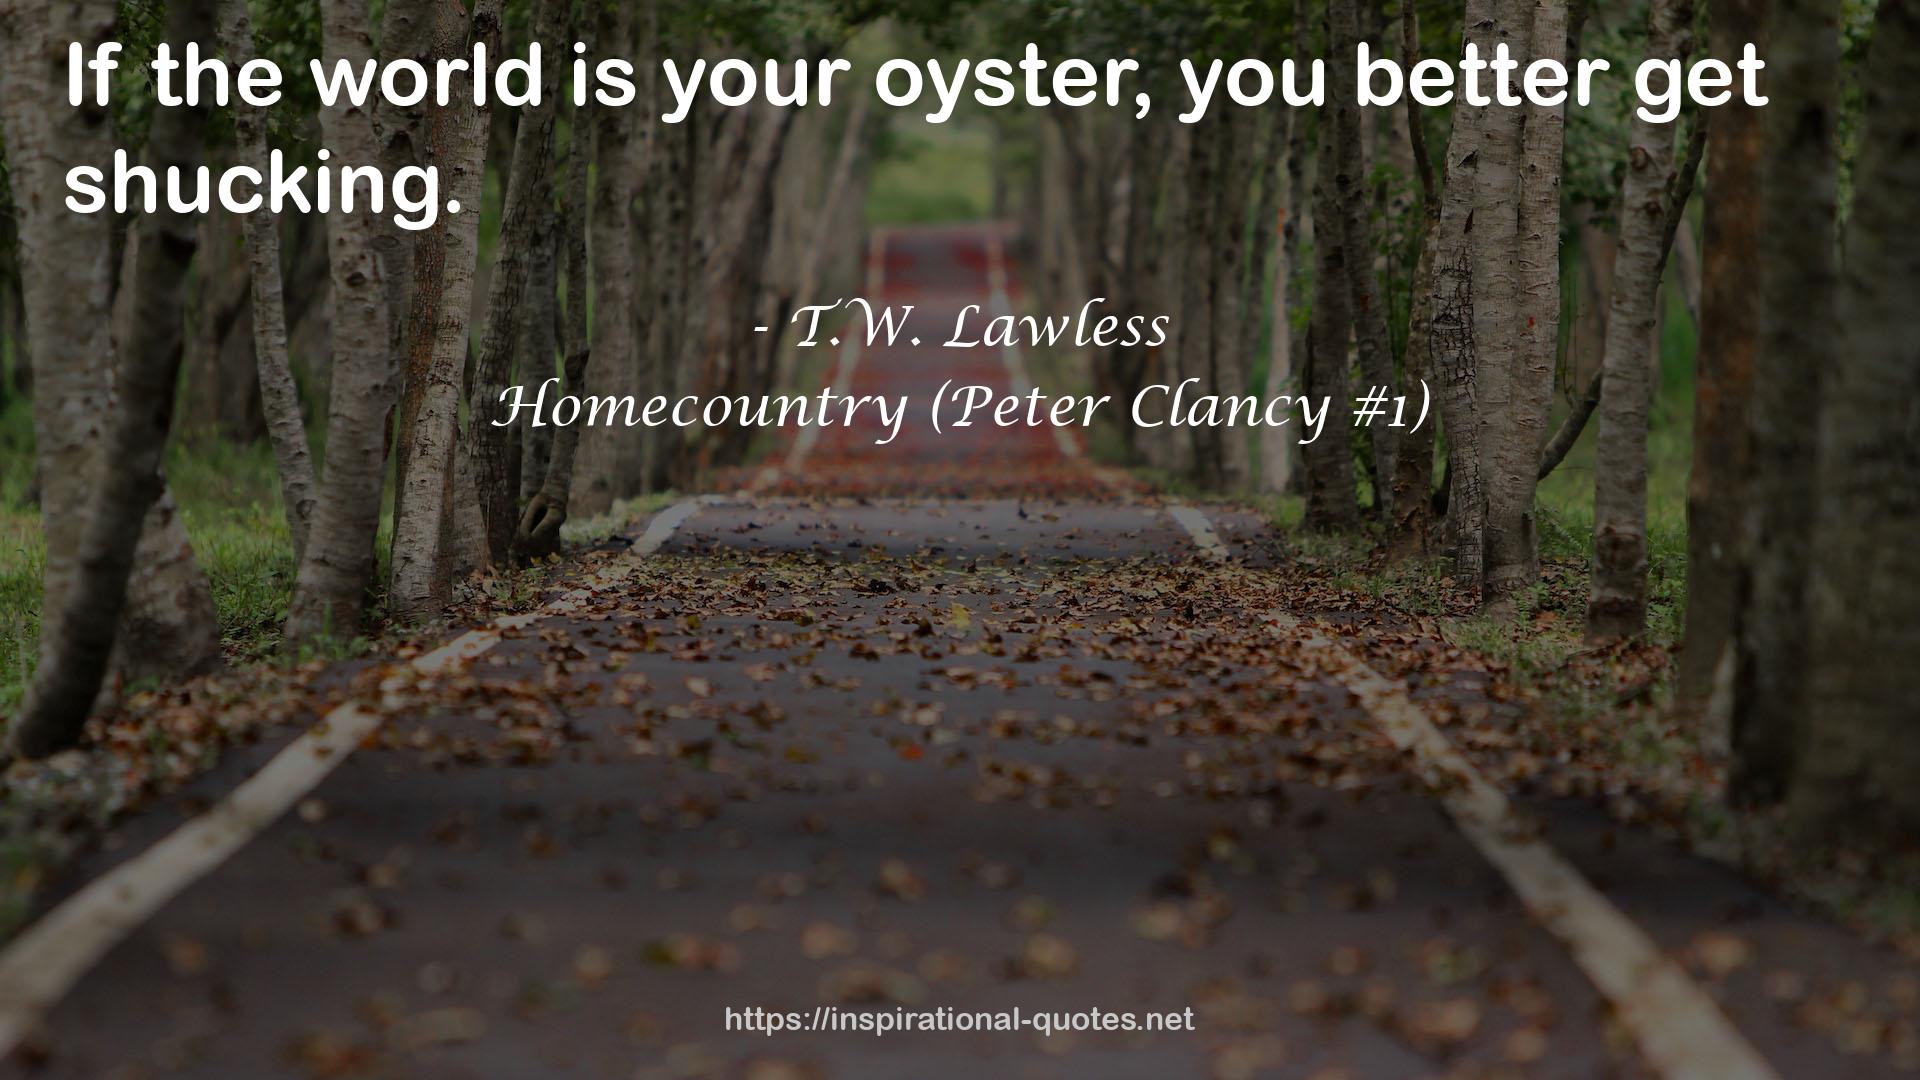 Homecountry (Peter Clancy #1) QUOTES